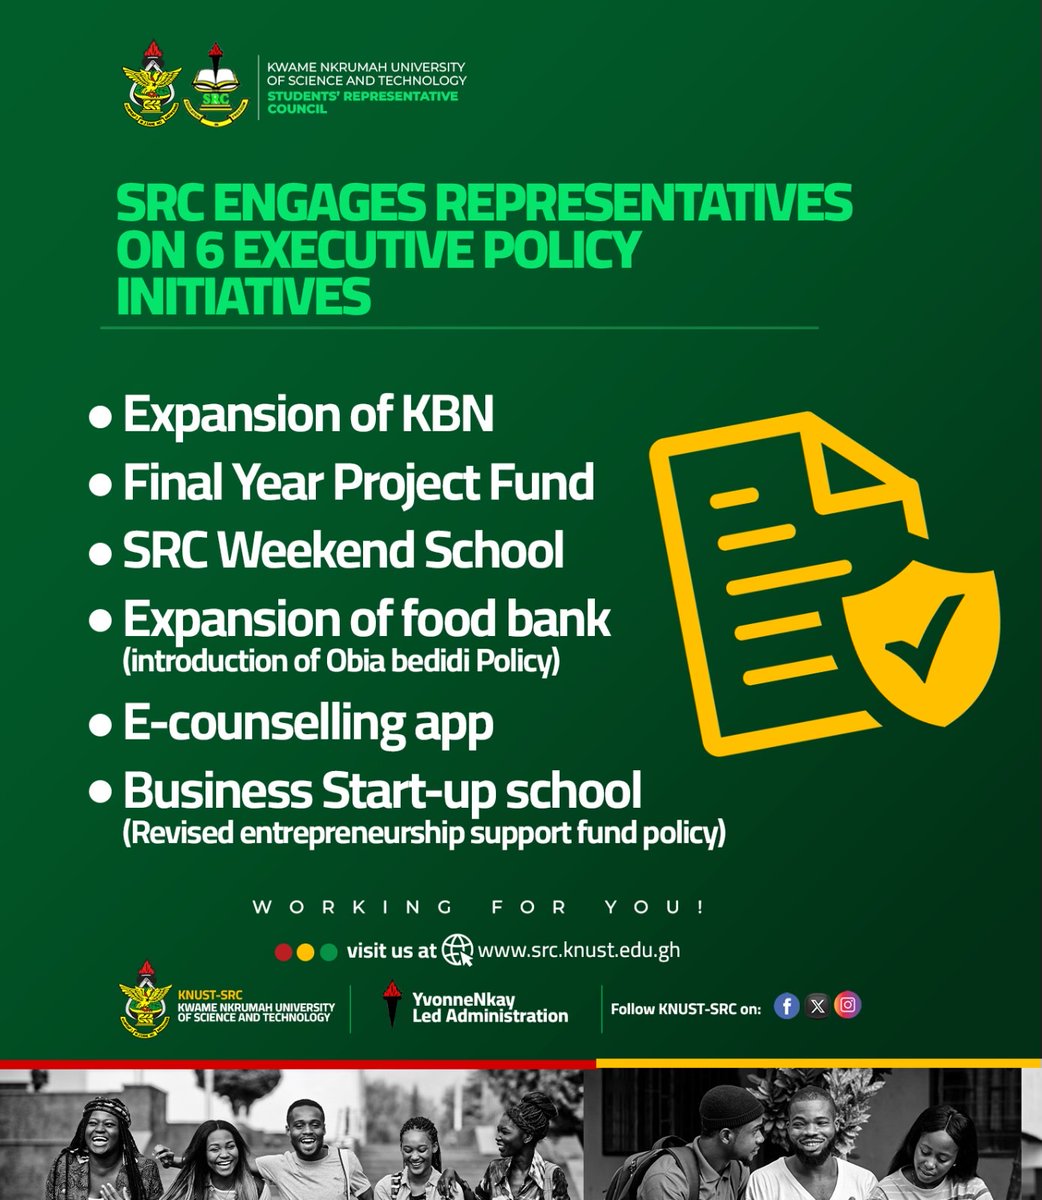 The SRC will engage the various representatives i.e College, halls, class reps, etc on the 6 Executive Policy initiatives to be implemented. #KNUSTSRC #WorkingForYou